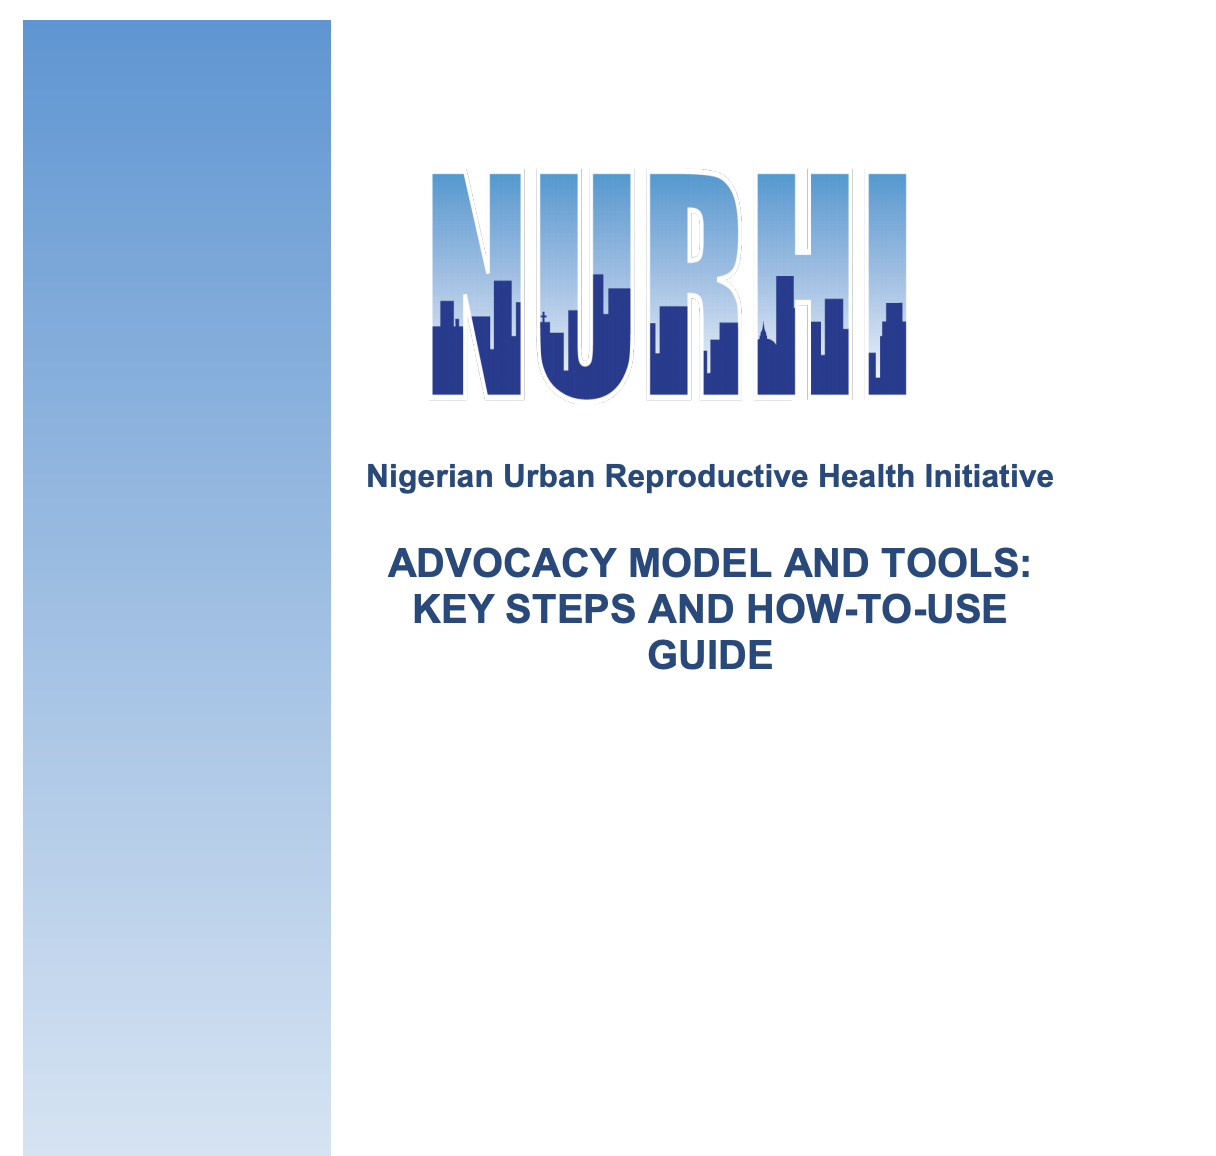 Advocacy Model and Tools